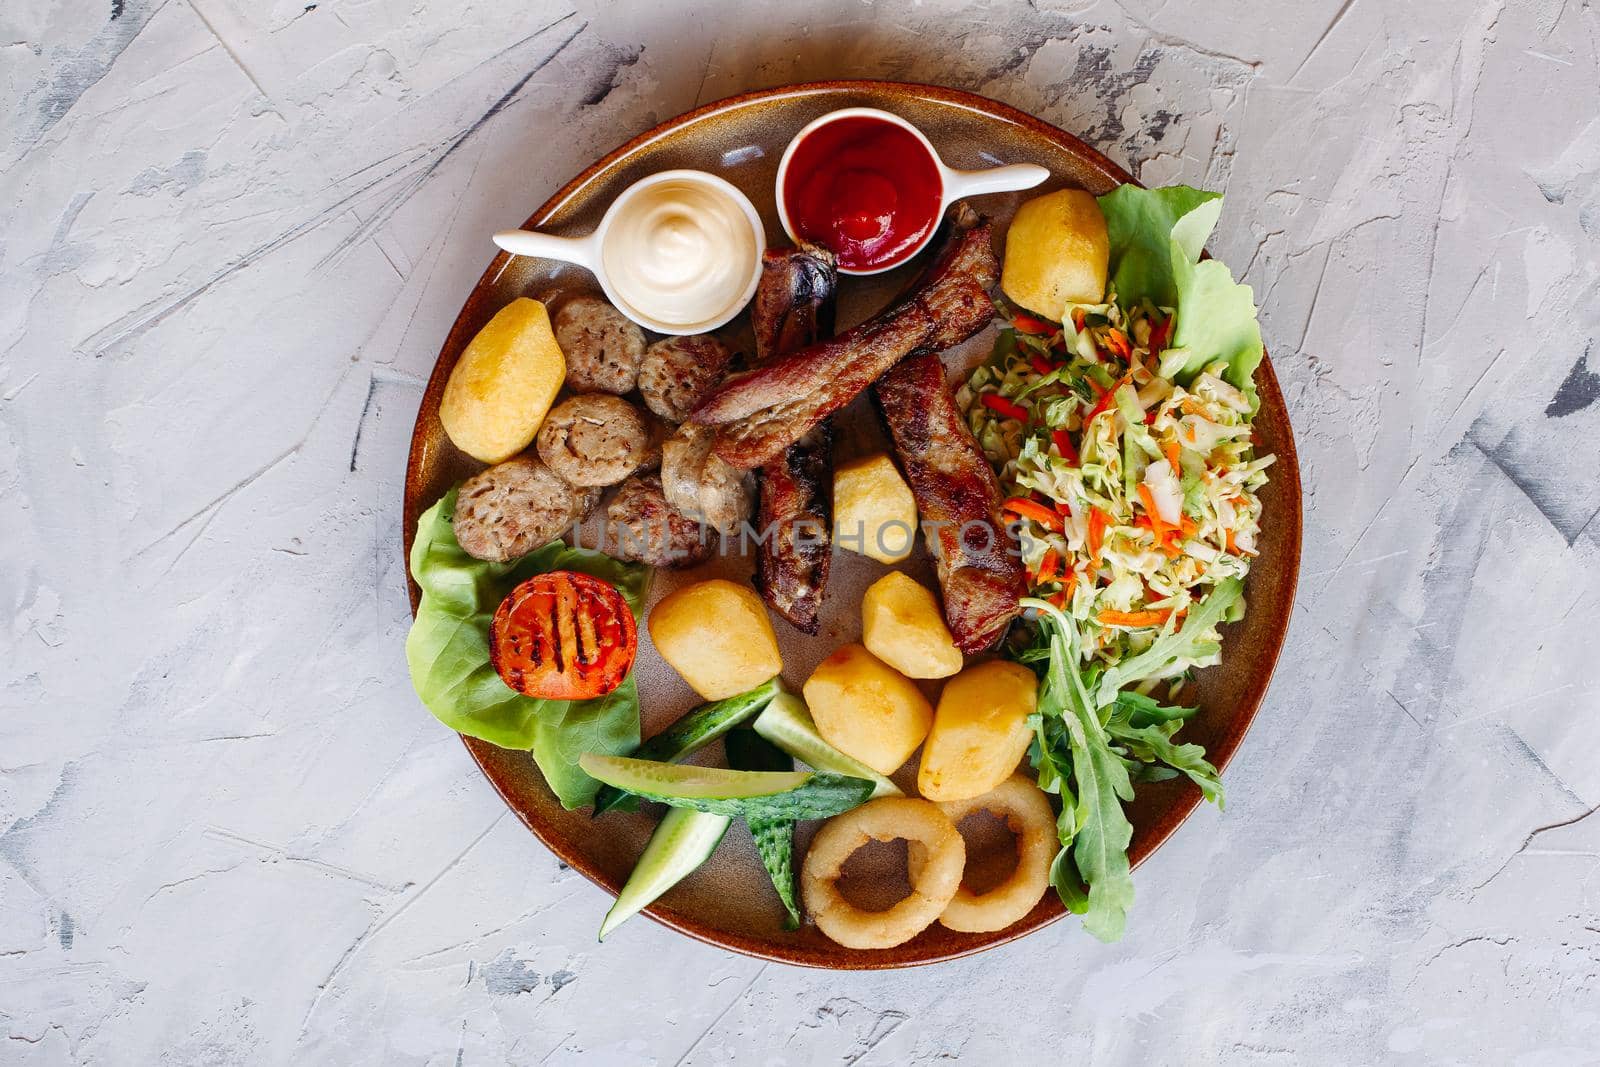 Top view of clay plate full of appetizers for beer including vegetable salad, boiled potatoes, grilled chicken legs, roasted goldy onion and sausages, cucmbers, tomatoes and sauces - ketchup and mayo.